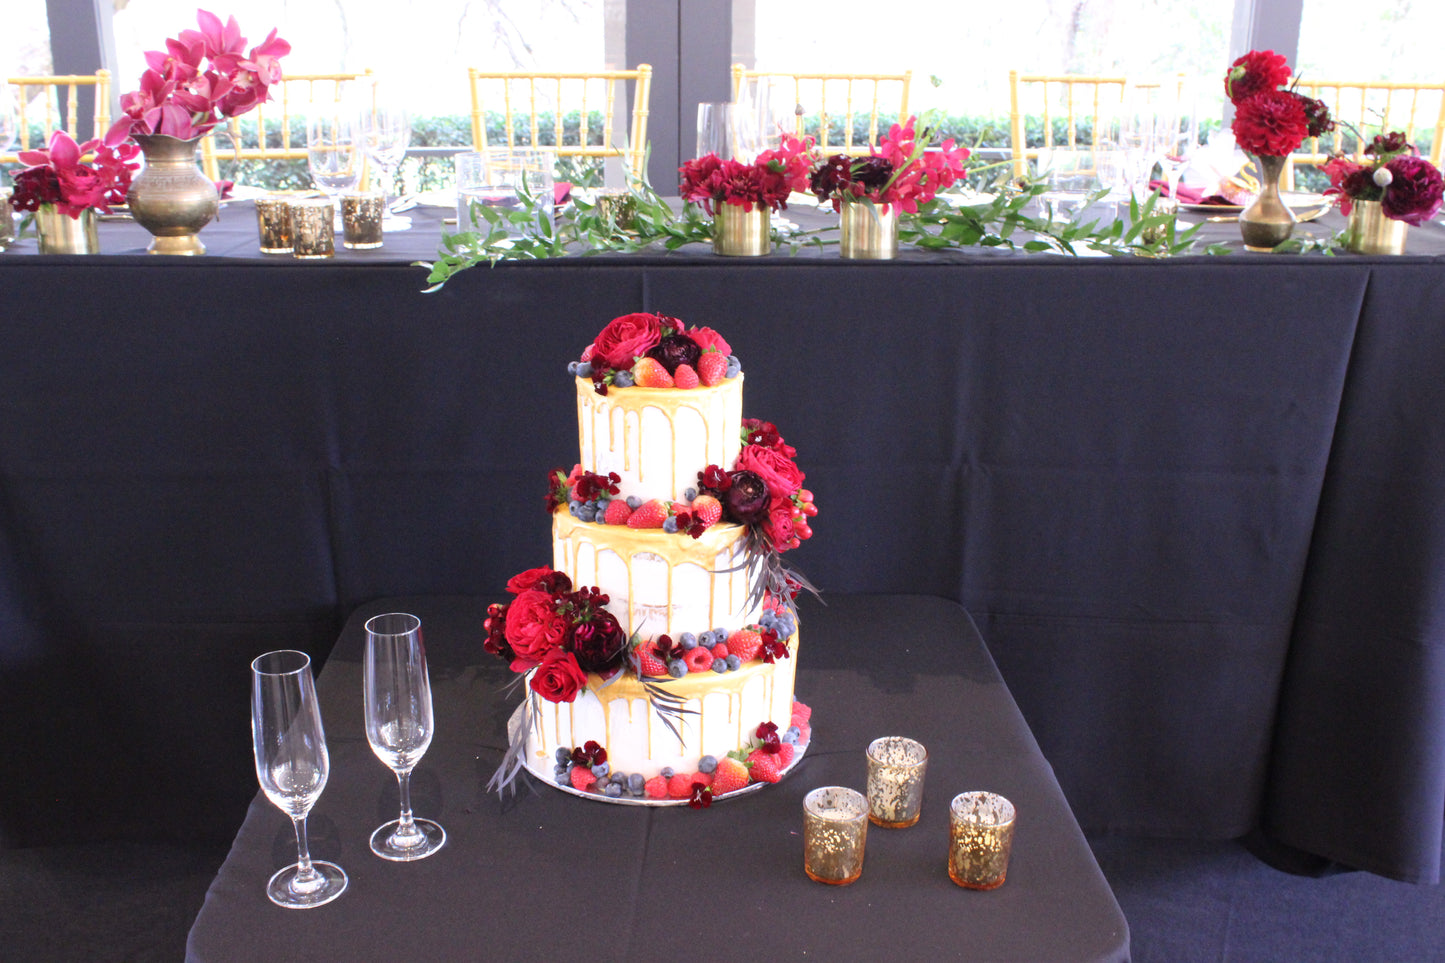 3 tier Gold Drizzle Cake with Red Flowers & Berries